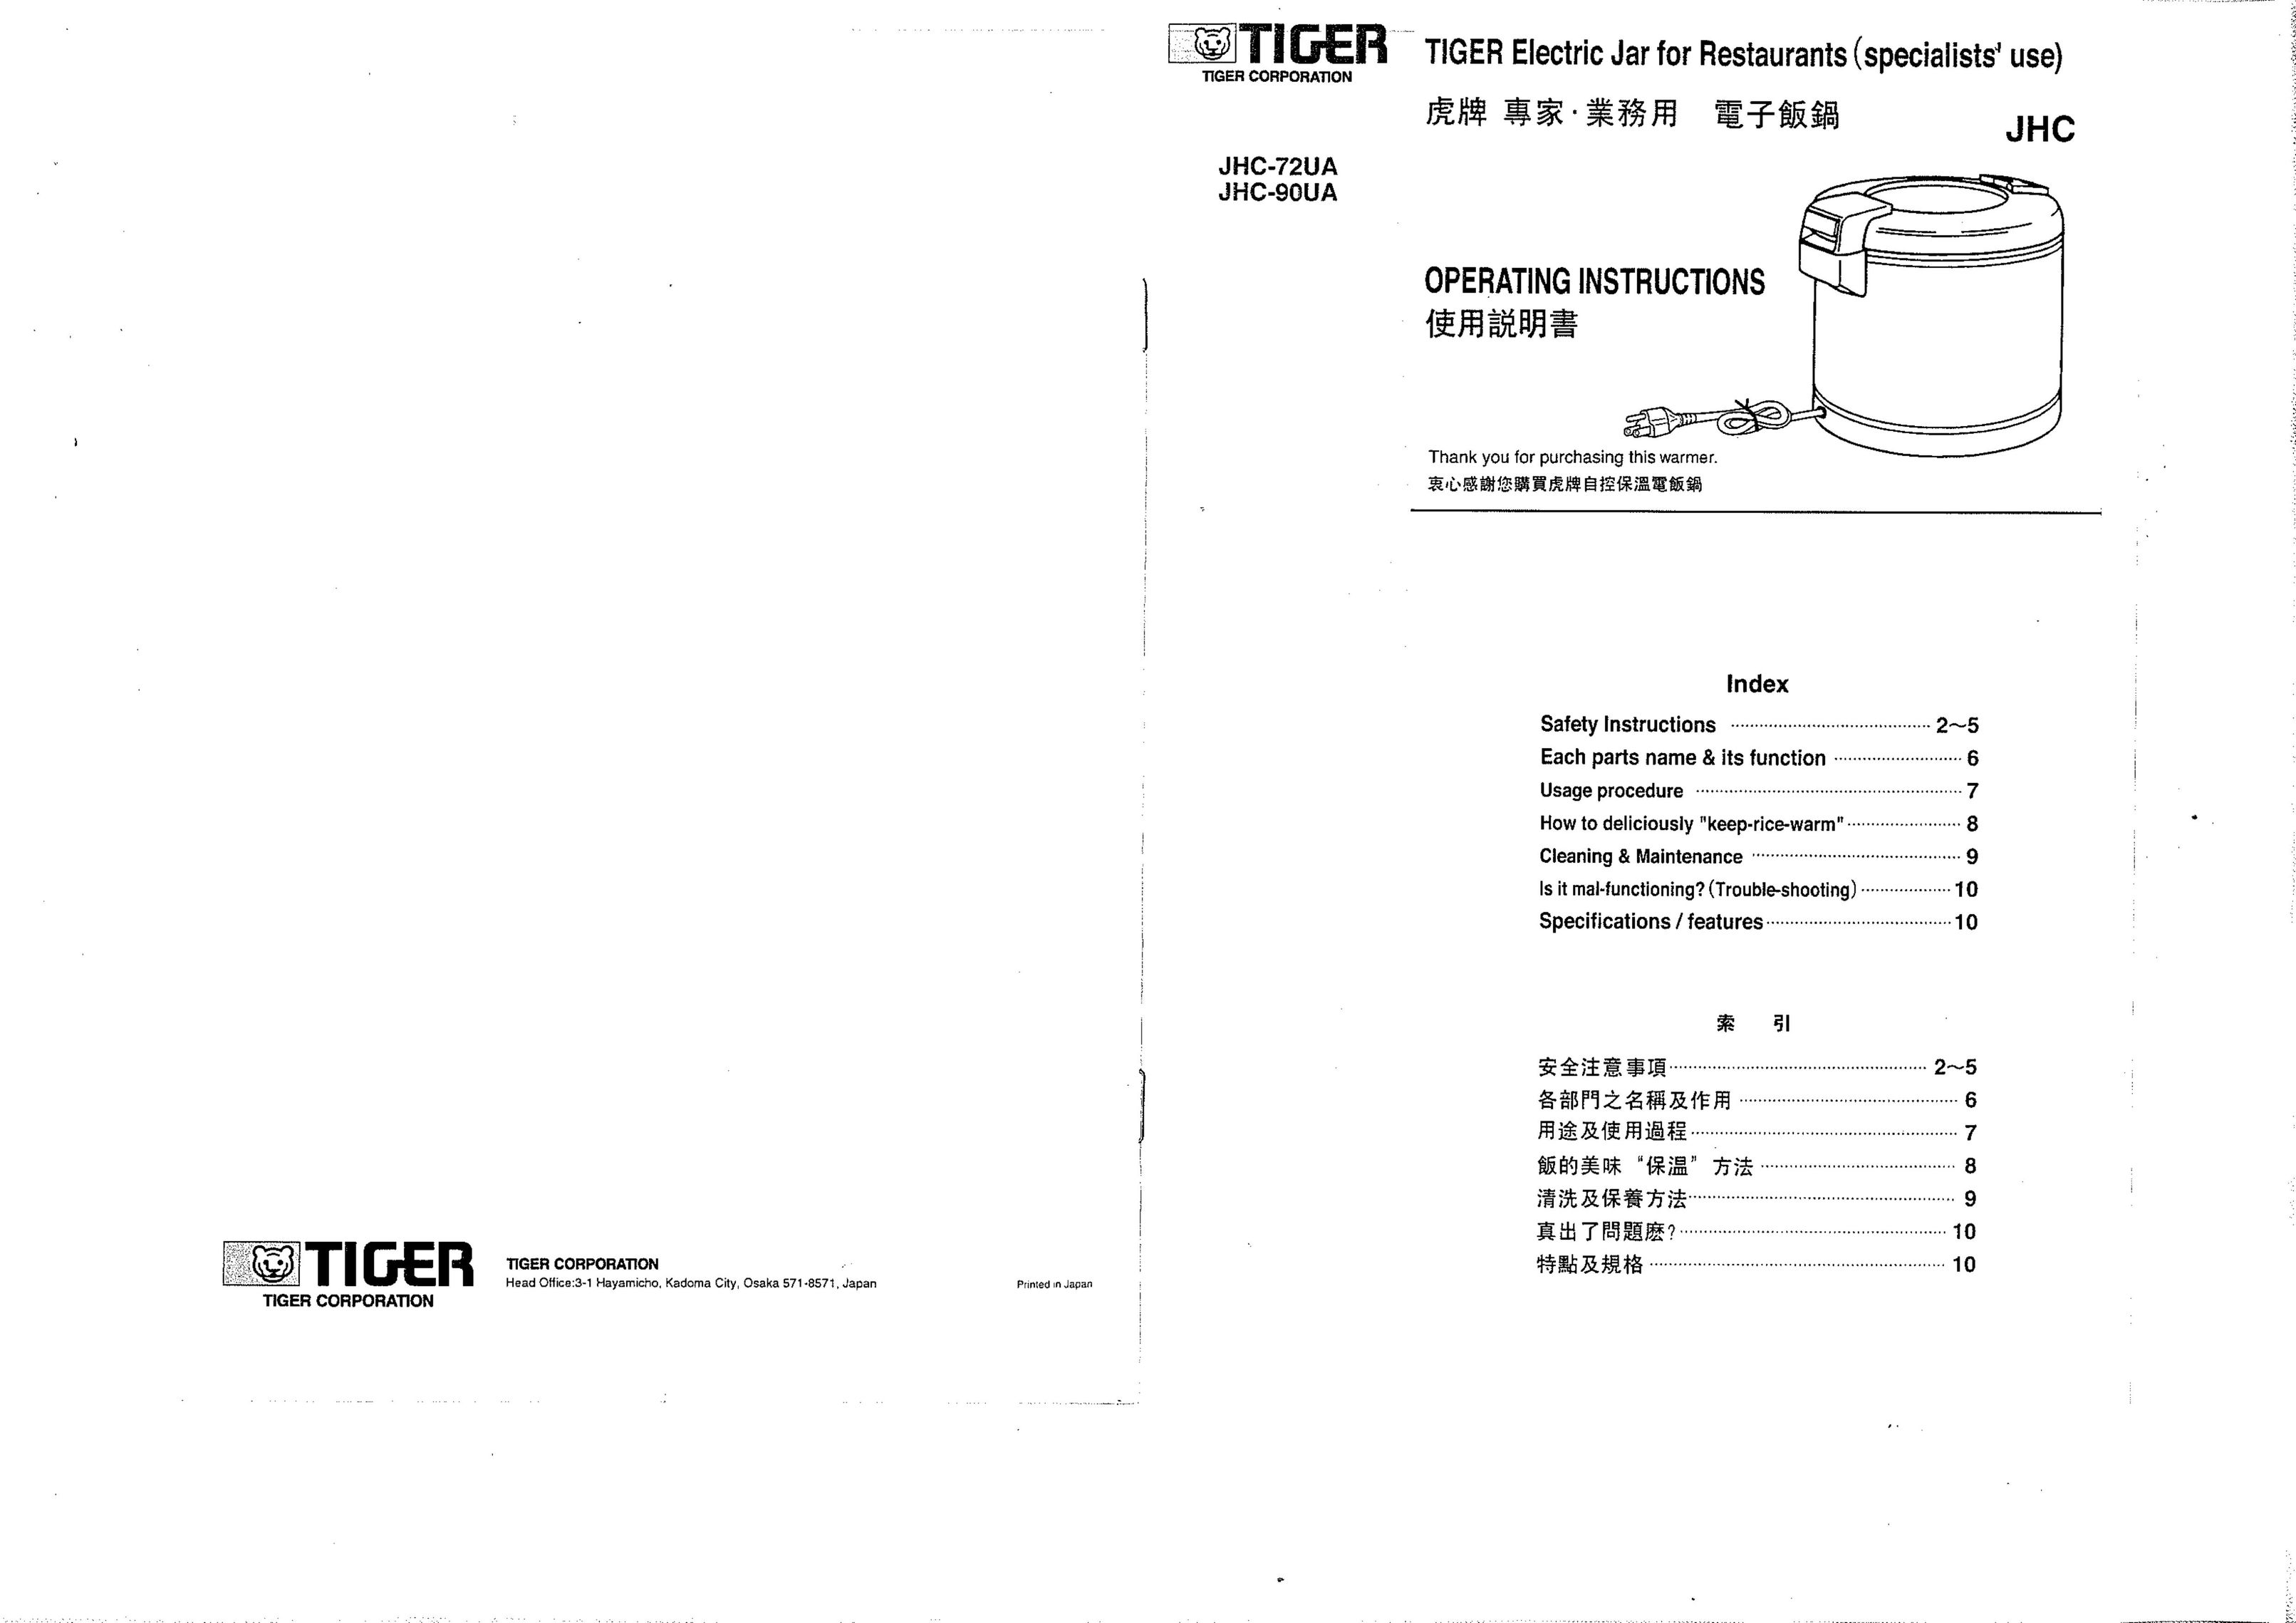 Tiger Products Co., Ltd JHC-90UA Can Opener User Manual